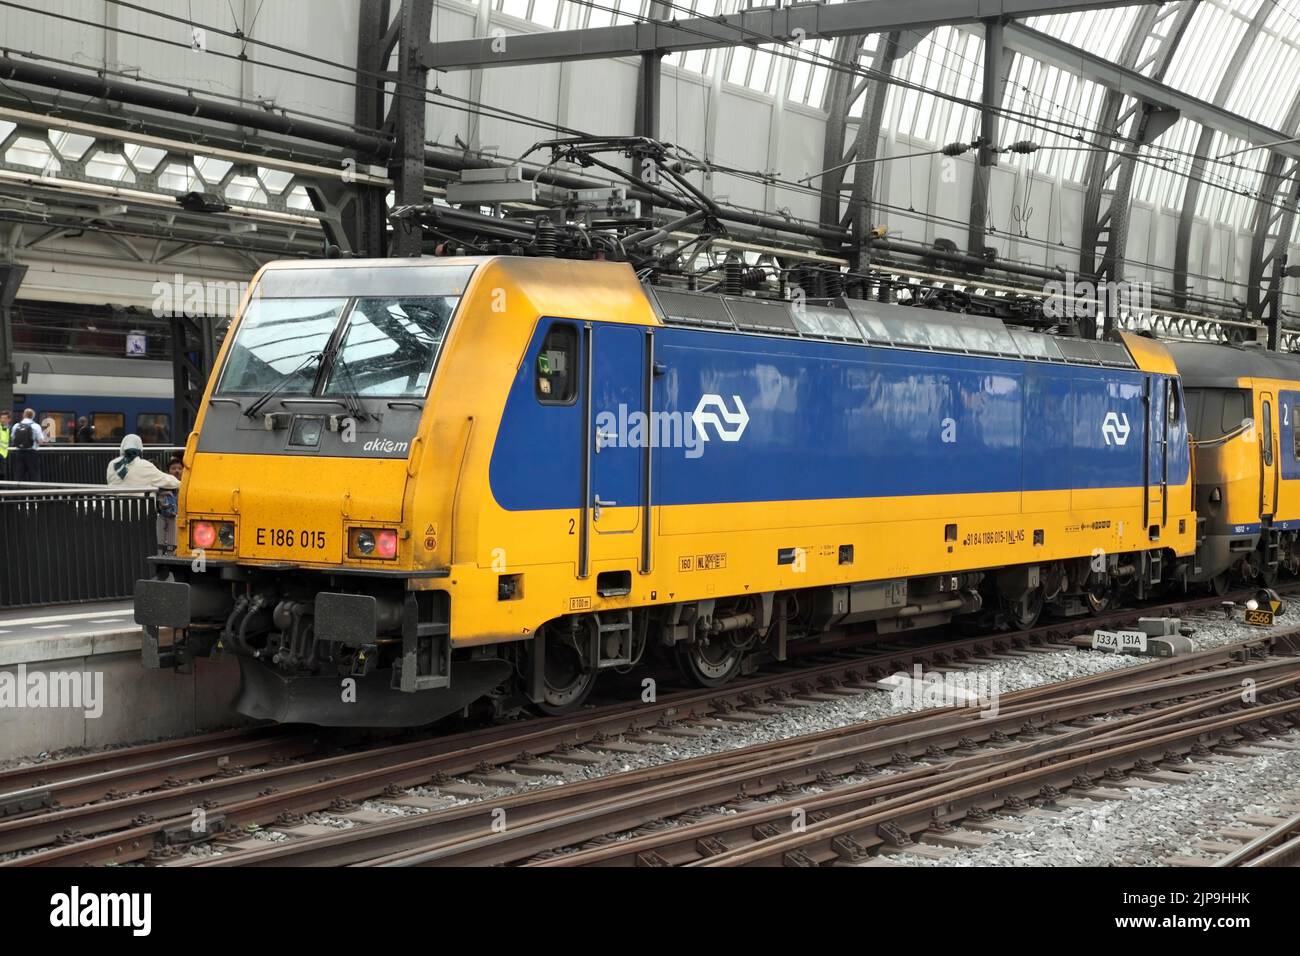 NS Class 186 electric locomotive E186 015 at Amsterdam Centraal railway station, Netherlands. Stock Photo